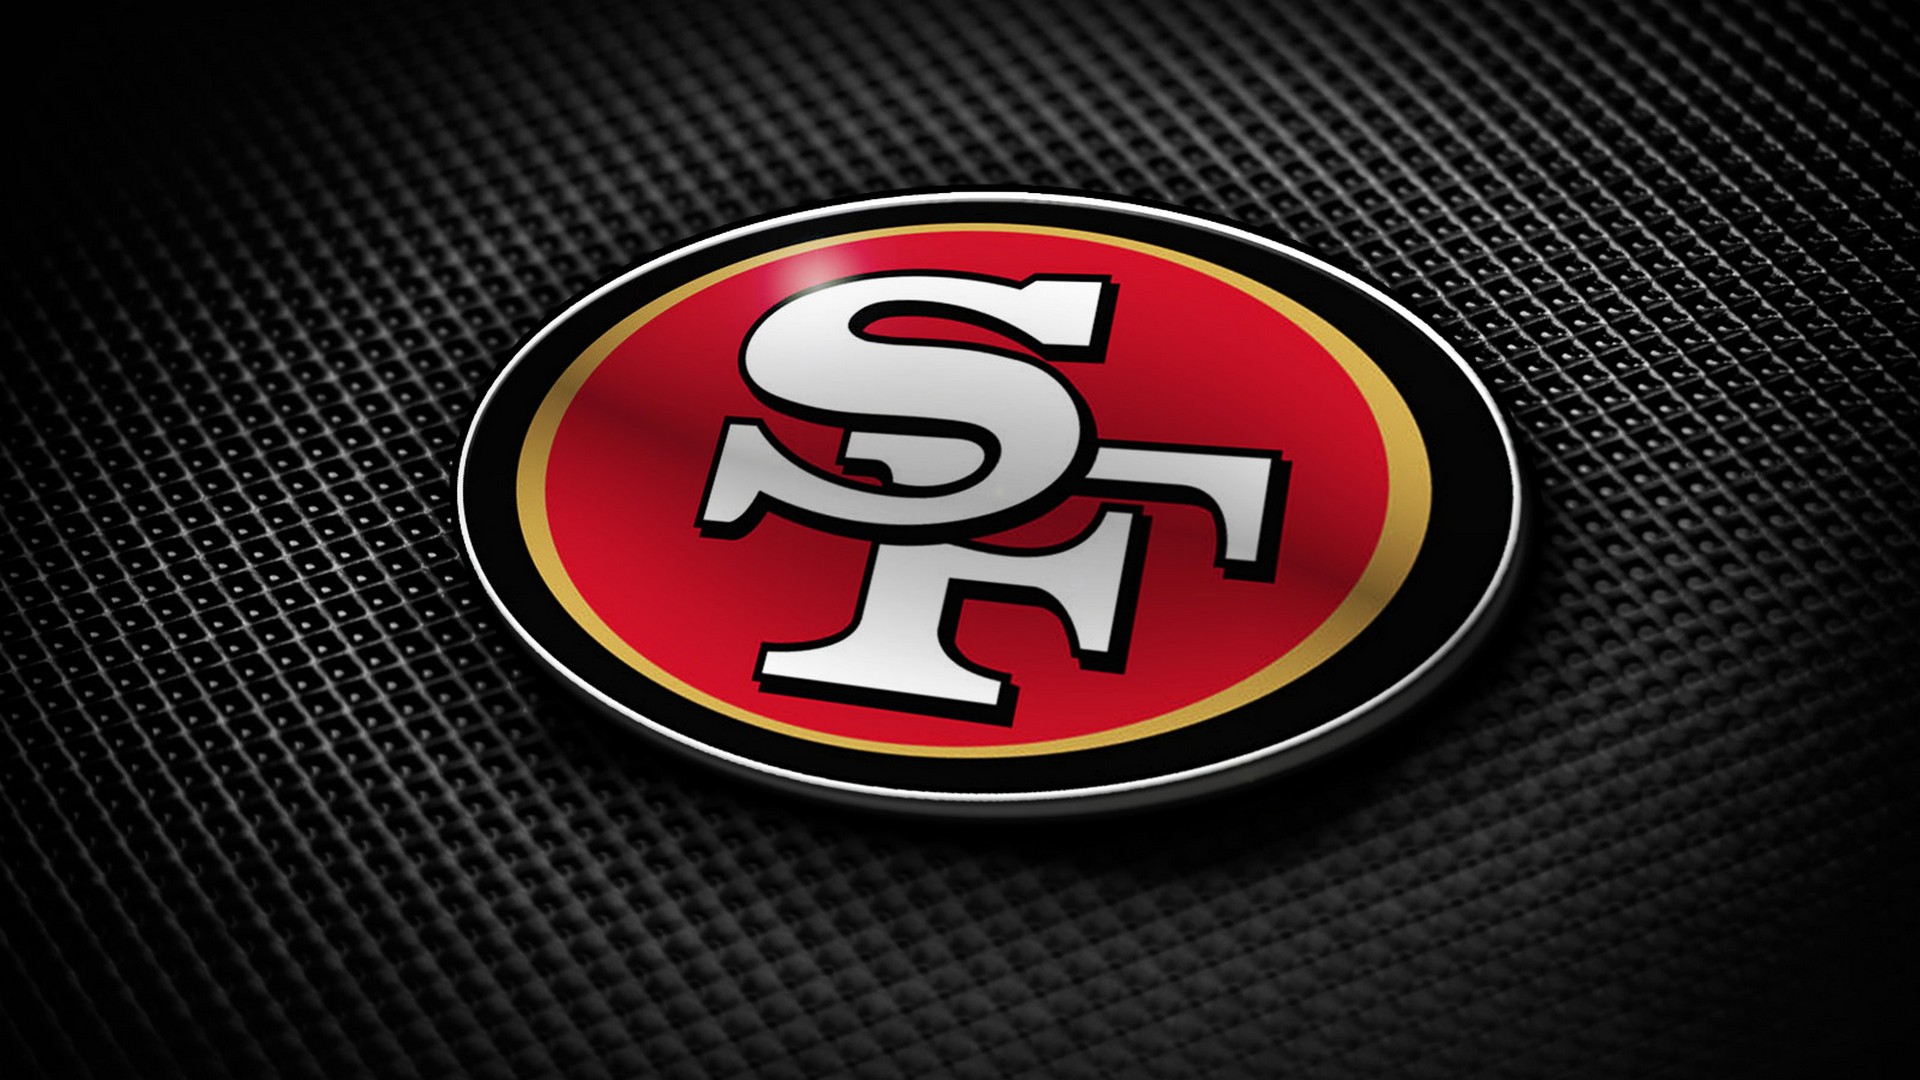 San Francisco 49ers For Desktop Wallpaper with high-resolution 1920x1080 pixel. You can use this wallpaper for your Mac or Windows Desktop Background, iPhone, Android or Tablet and another Smartphone device